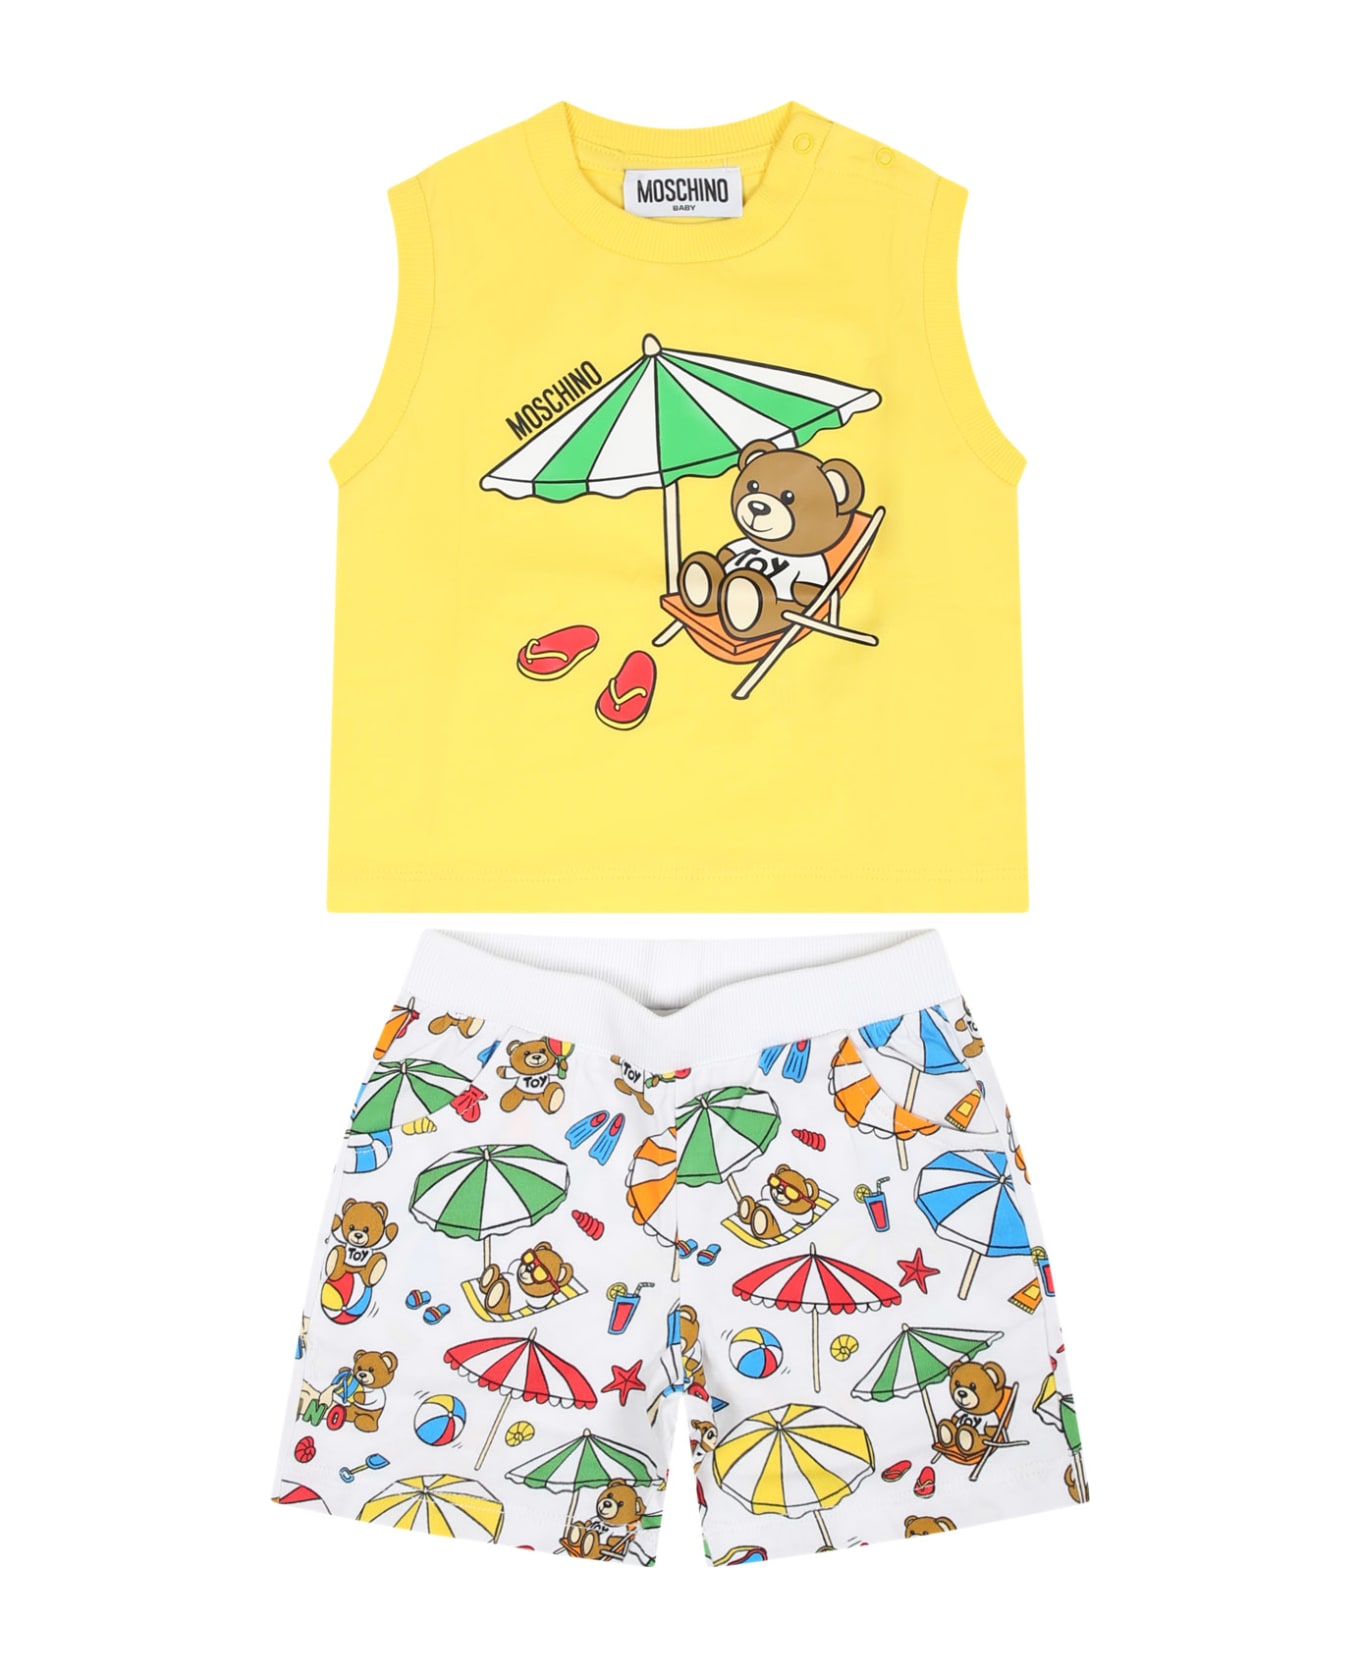 Moschino Yellow Sports Suit For Baby Boy With Teddy Bear - Yellow ボトムス